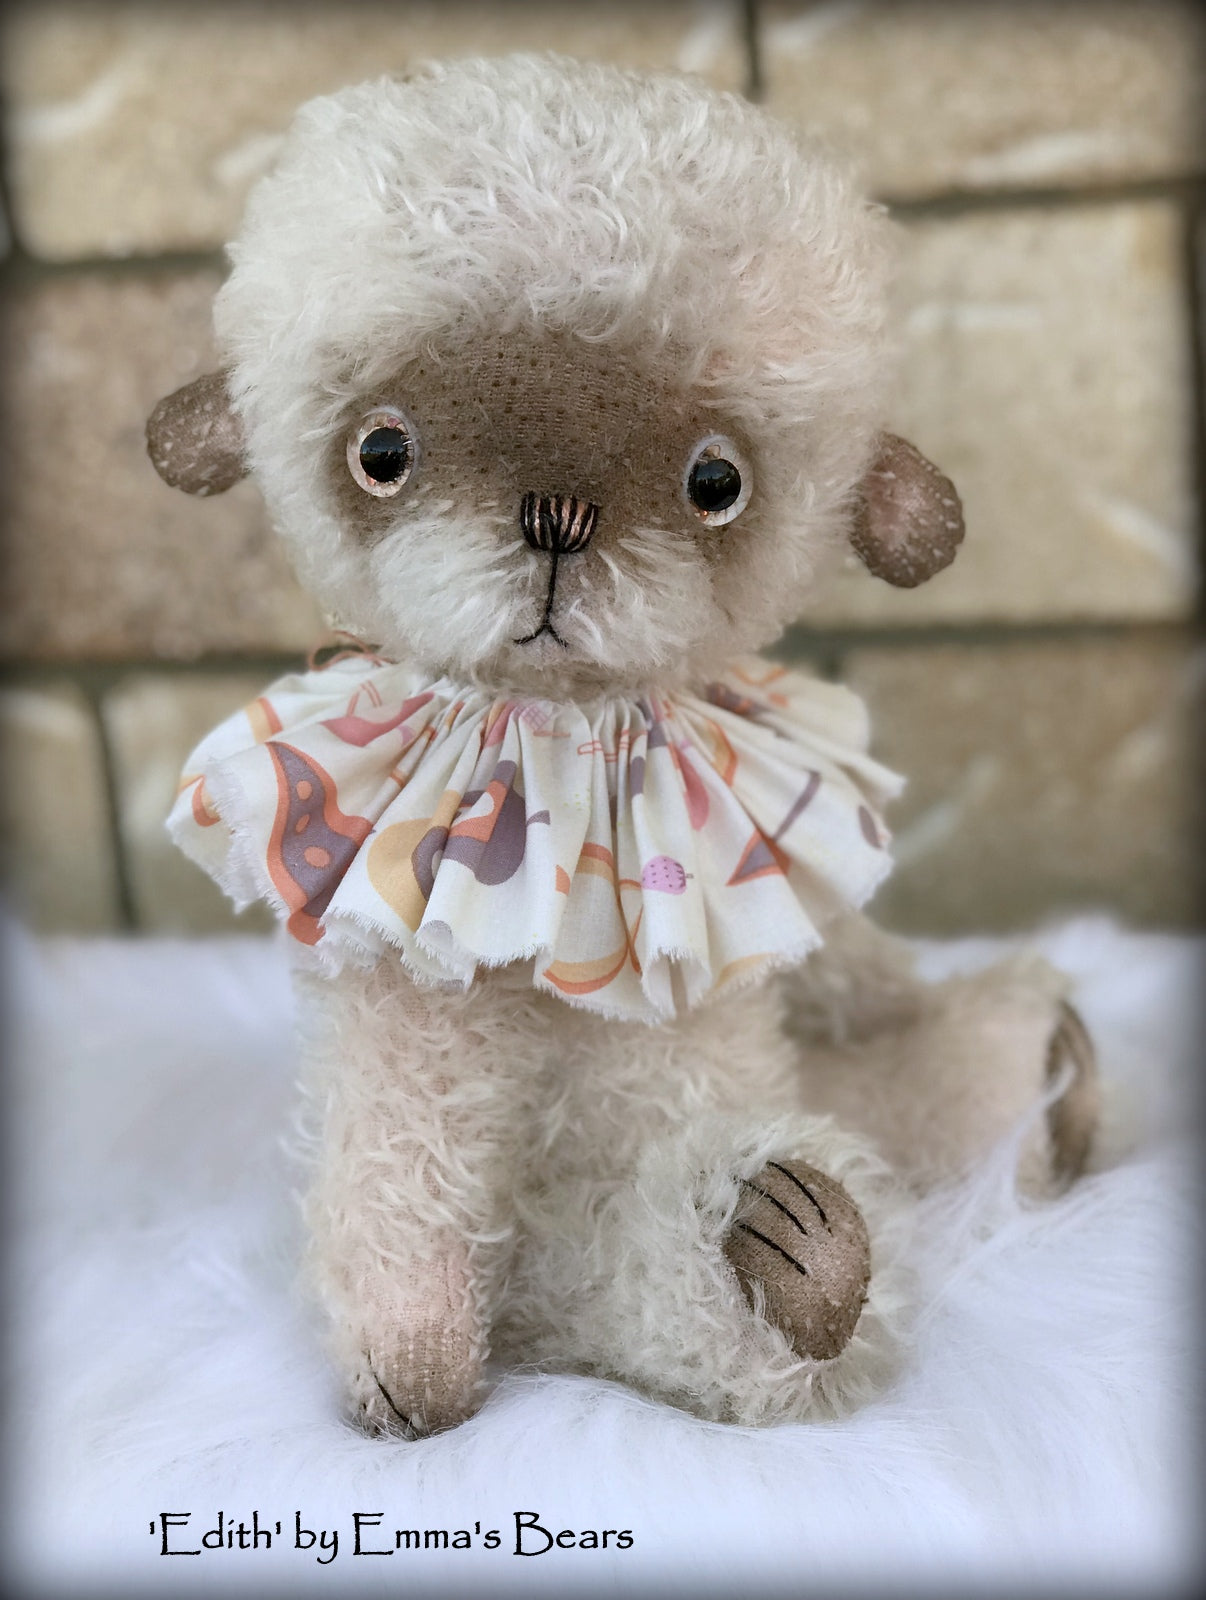 Edith - 13" hand-dyed double thick mohair Artist Bear by Emma's Bears - Limited Edition